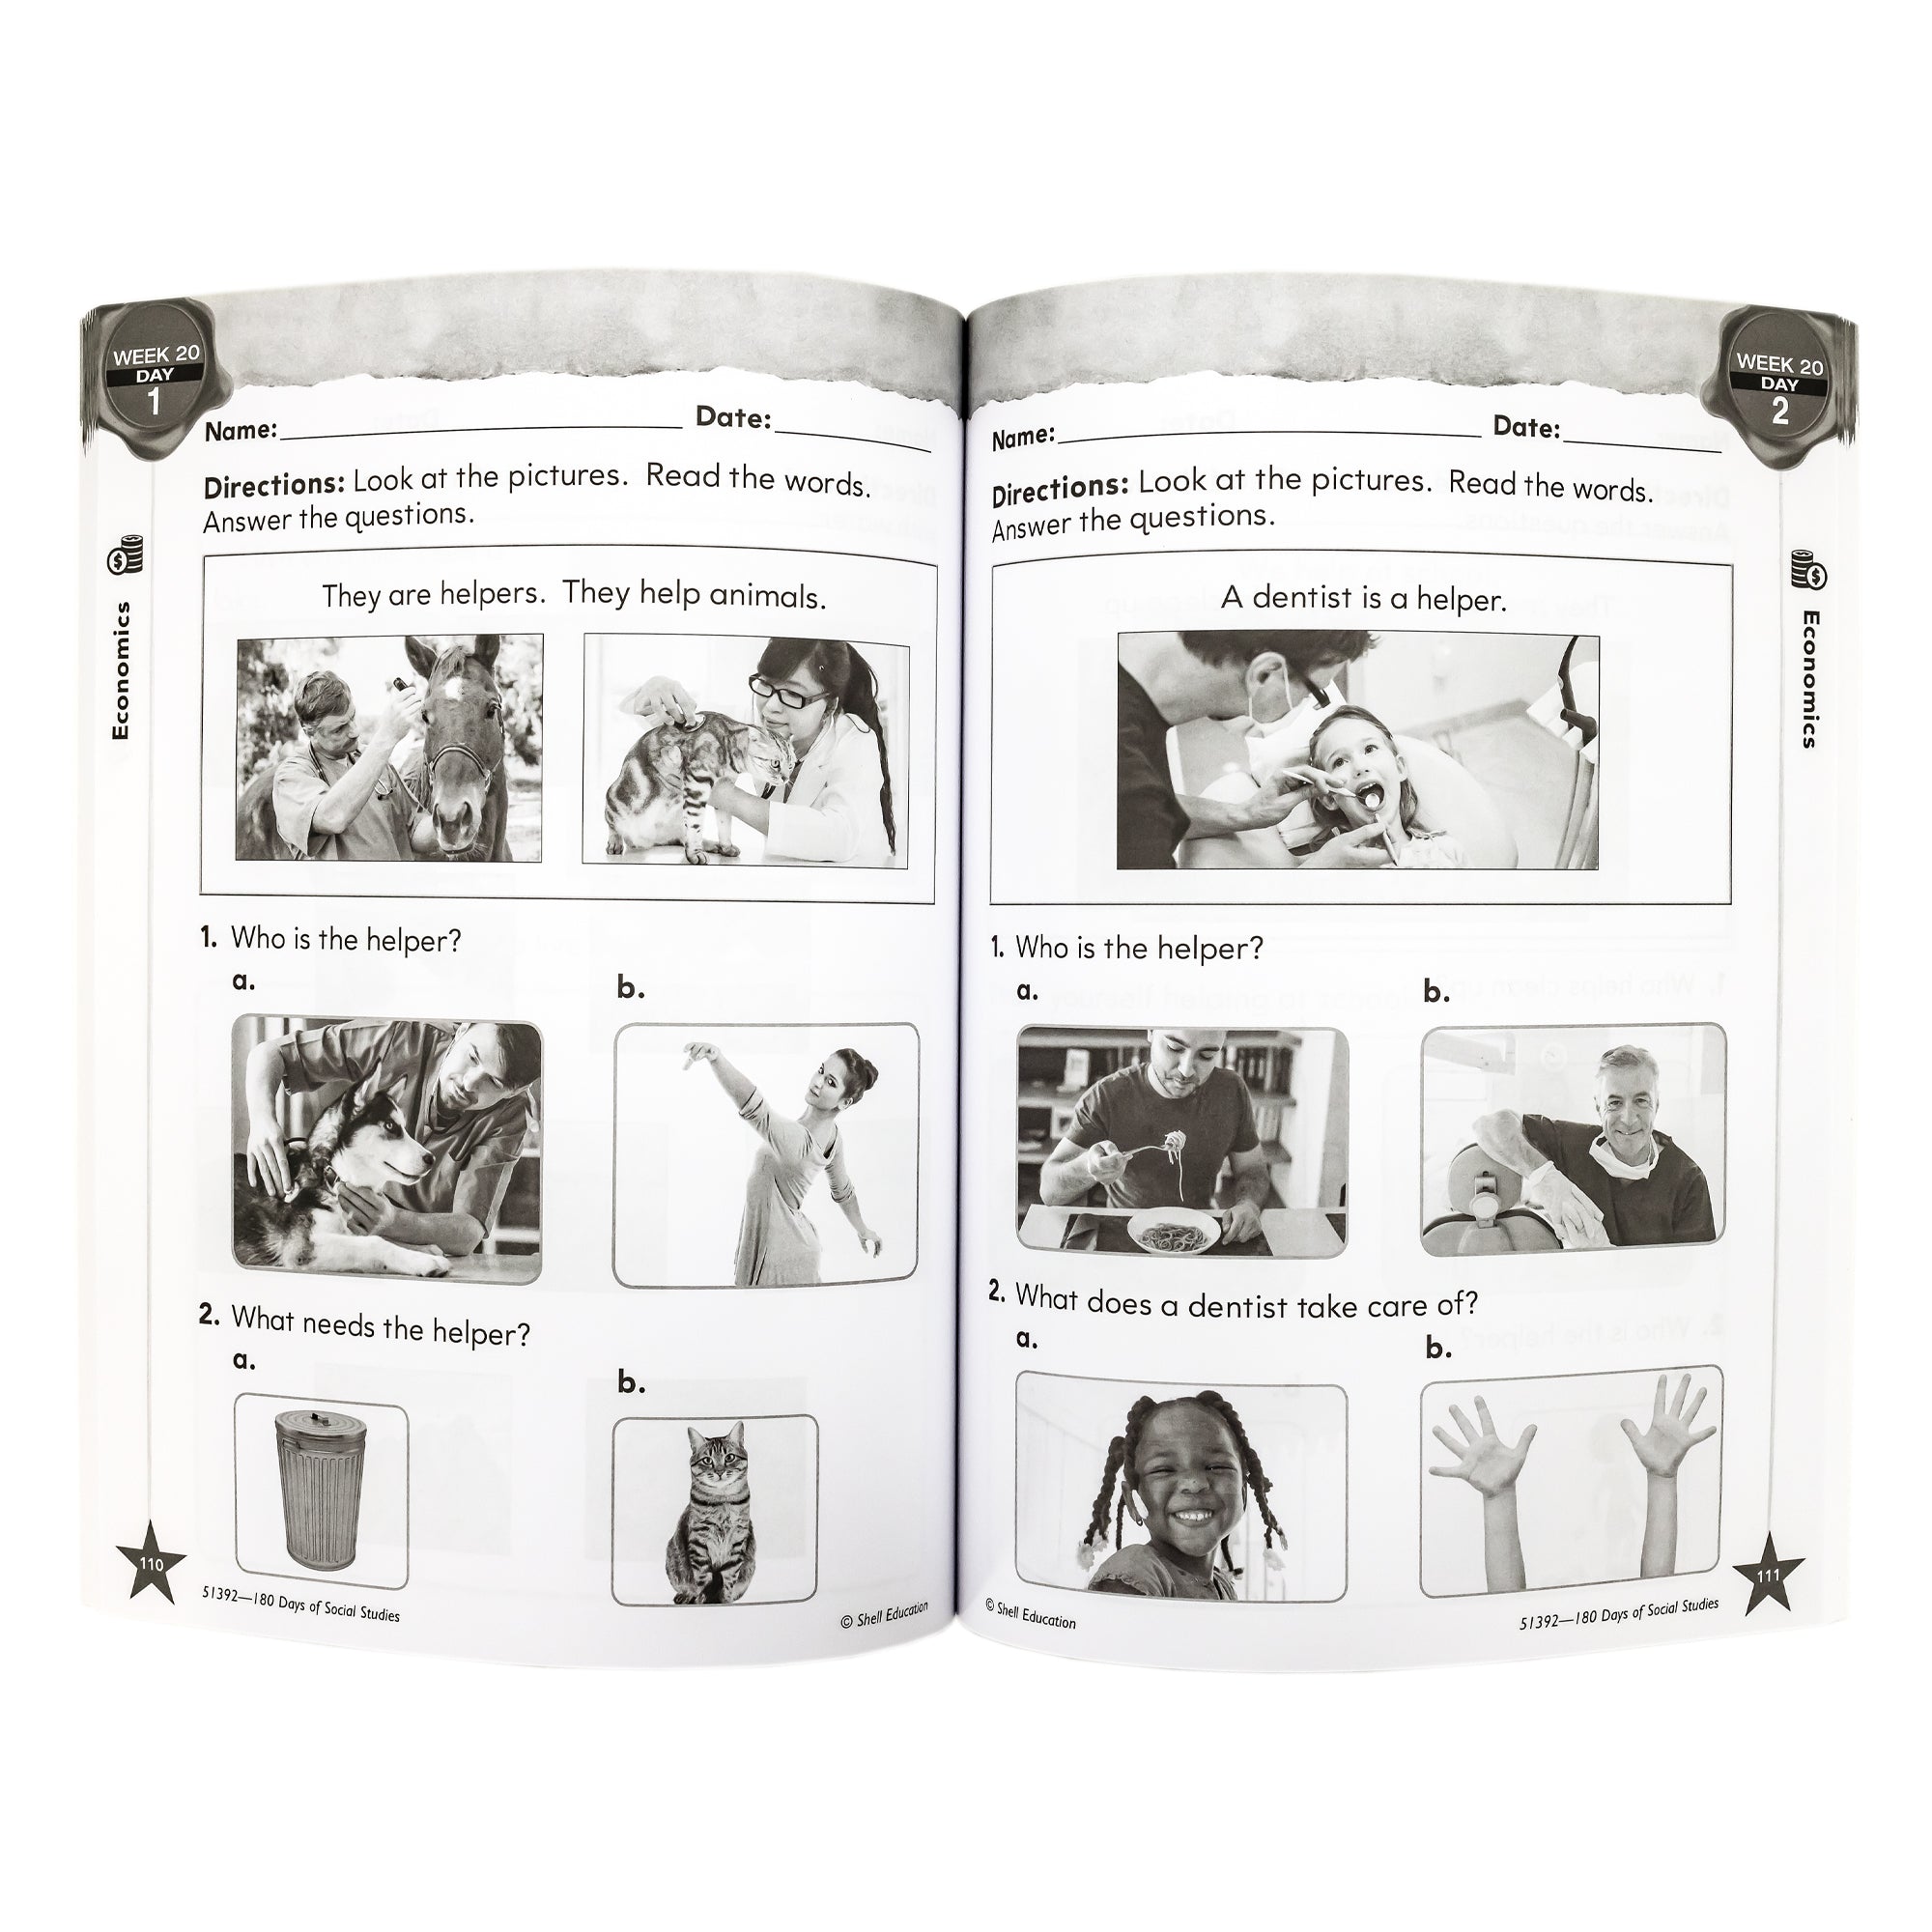 180 Days of Social Studies for Kindergarten book open to show inside pages.  Each page shows 6 pictures. The left page shows animal helpers and has you select related pictures. The right page shows dental helpers and has you select the related pictures.